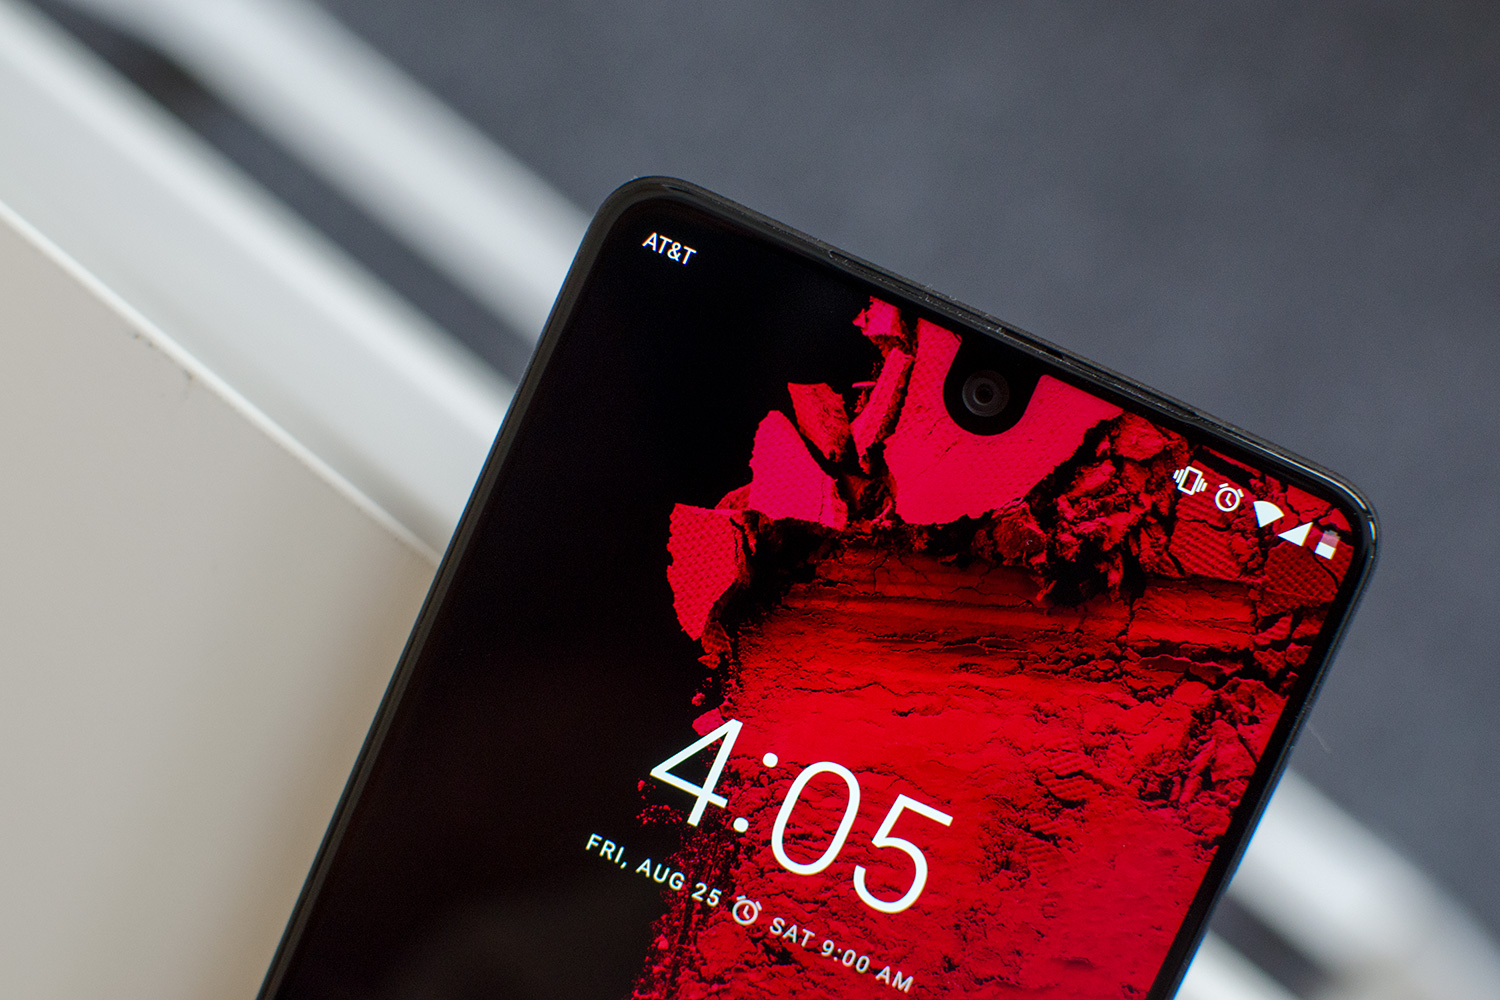 Essential Phone (PH-1) | News, Specs, and Release Date | Digital